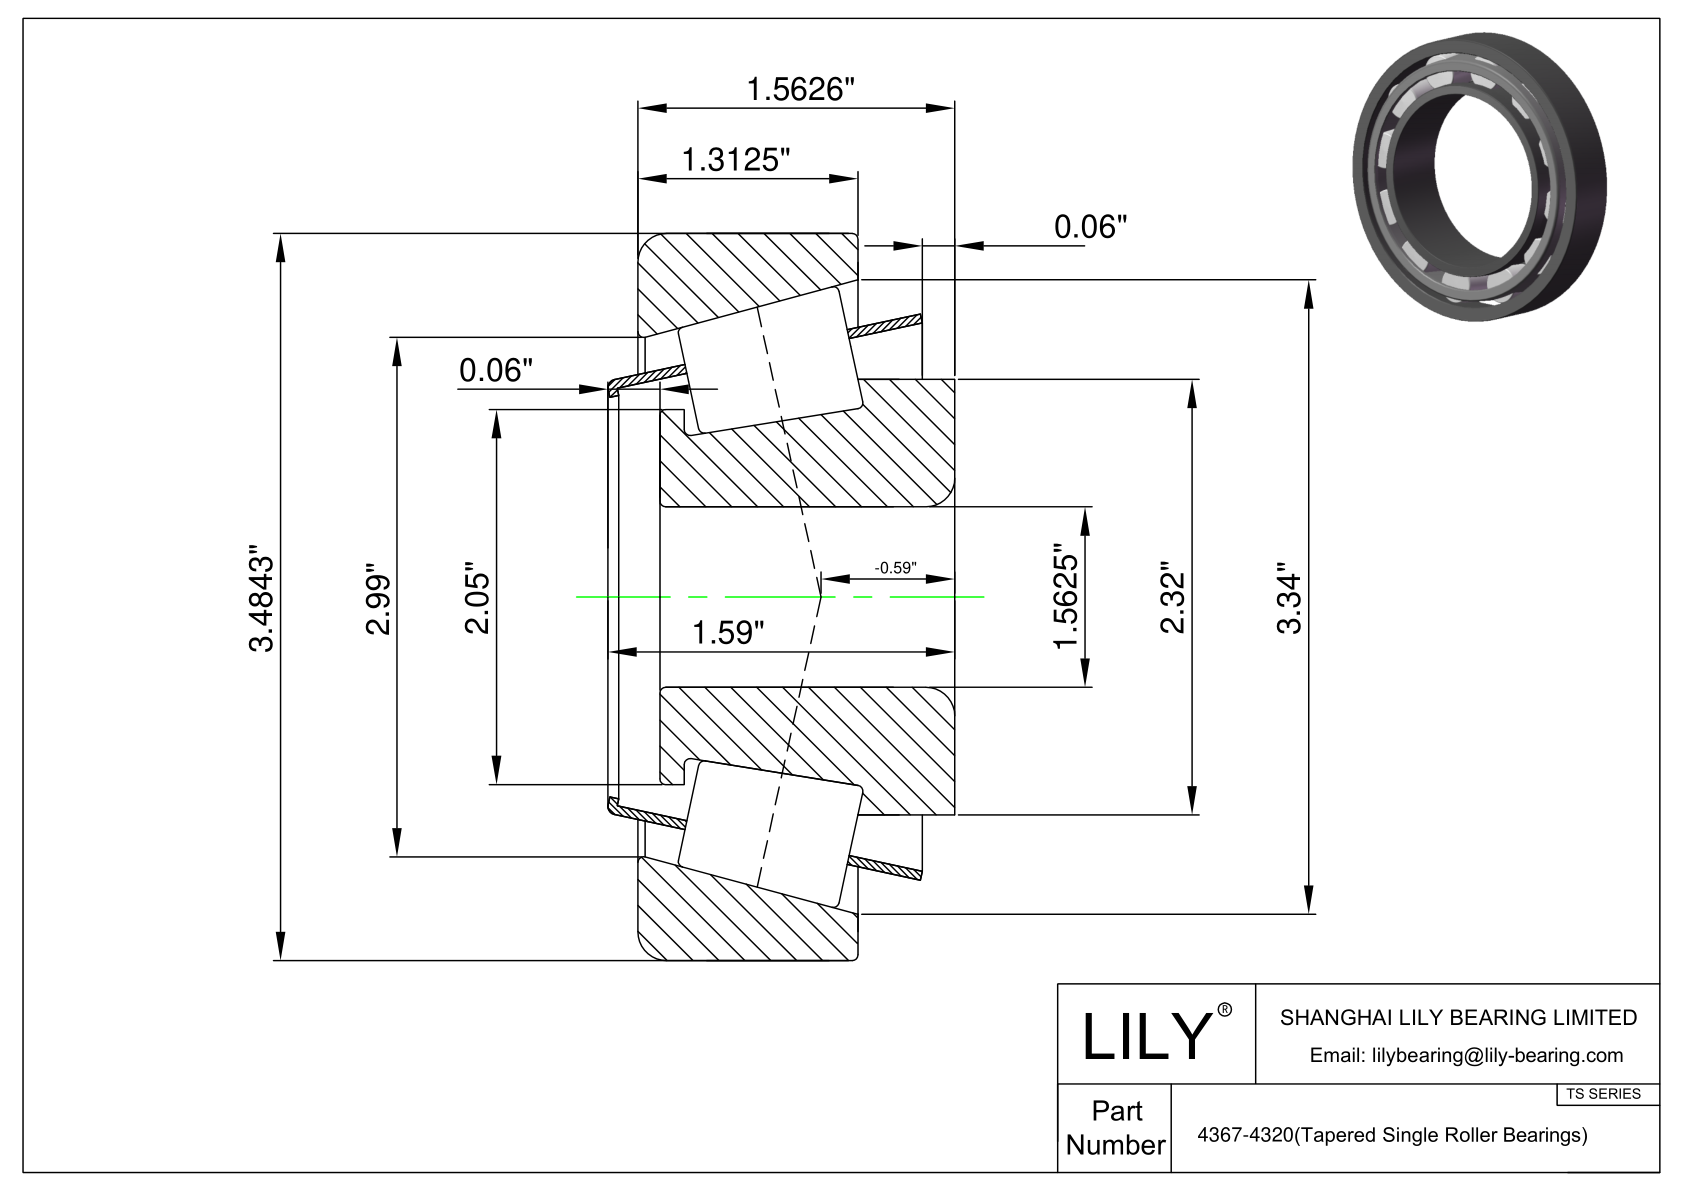 4367-4320 TS (Tapered Single Roller Bearings) (Imperial) cad drawing